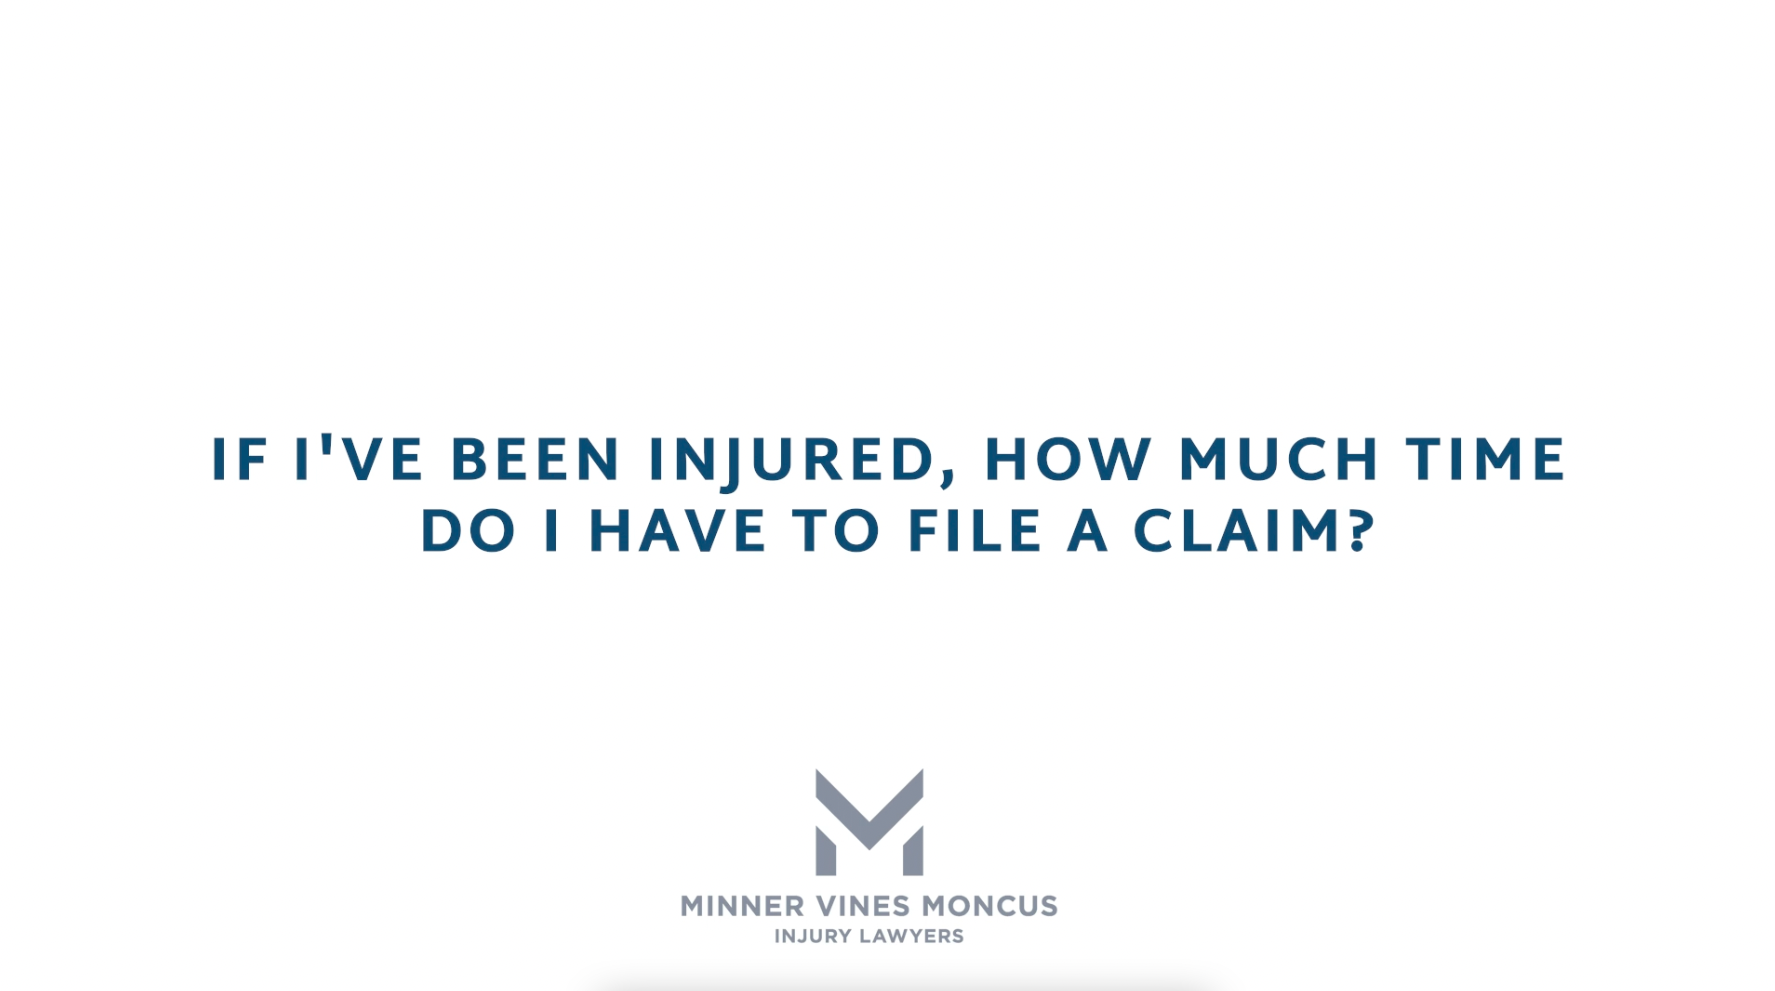 If I’ve been injured, how much time do I have to file a claim?